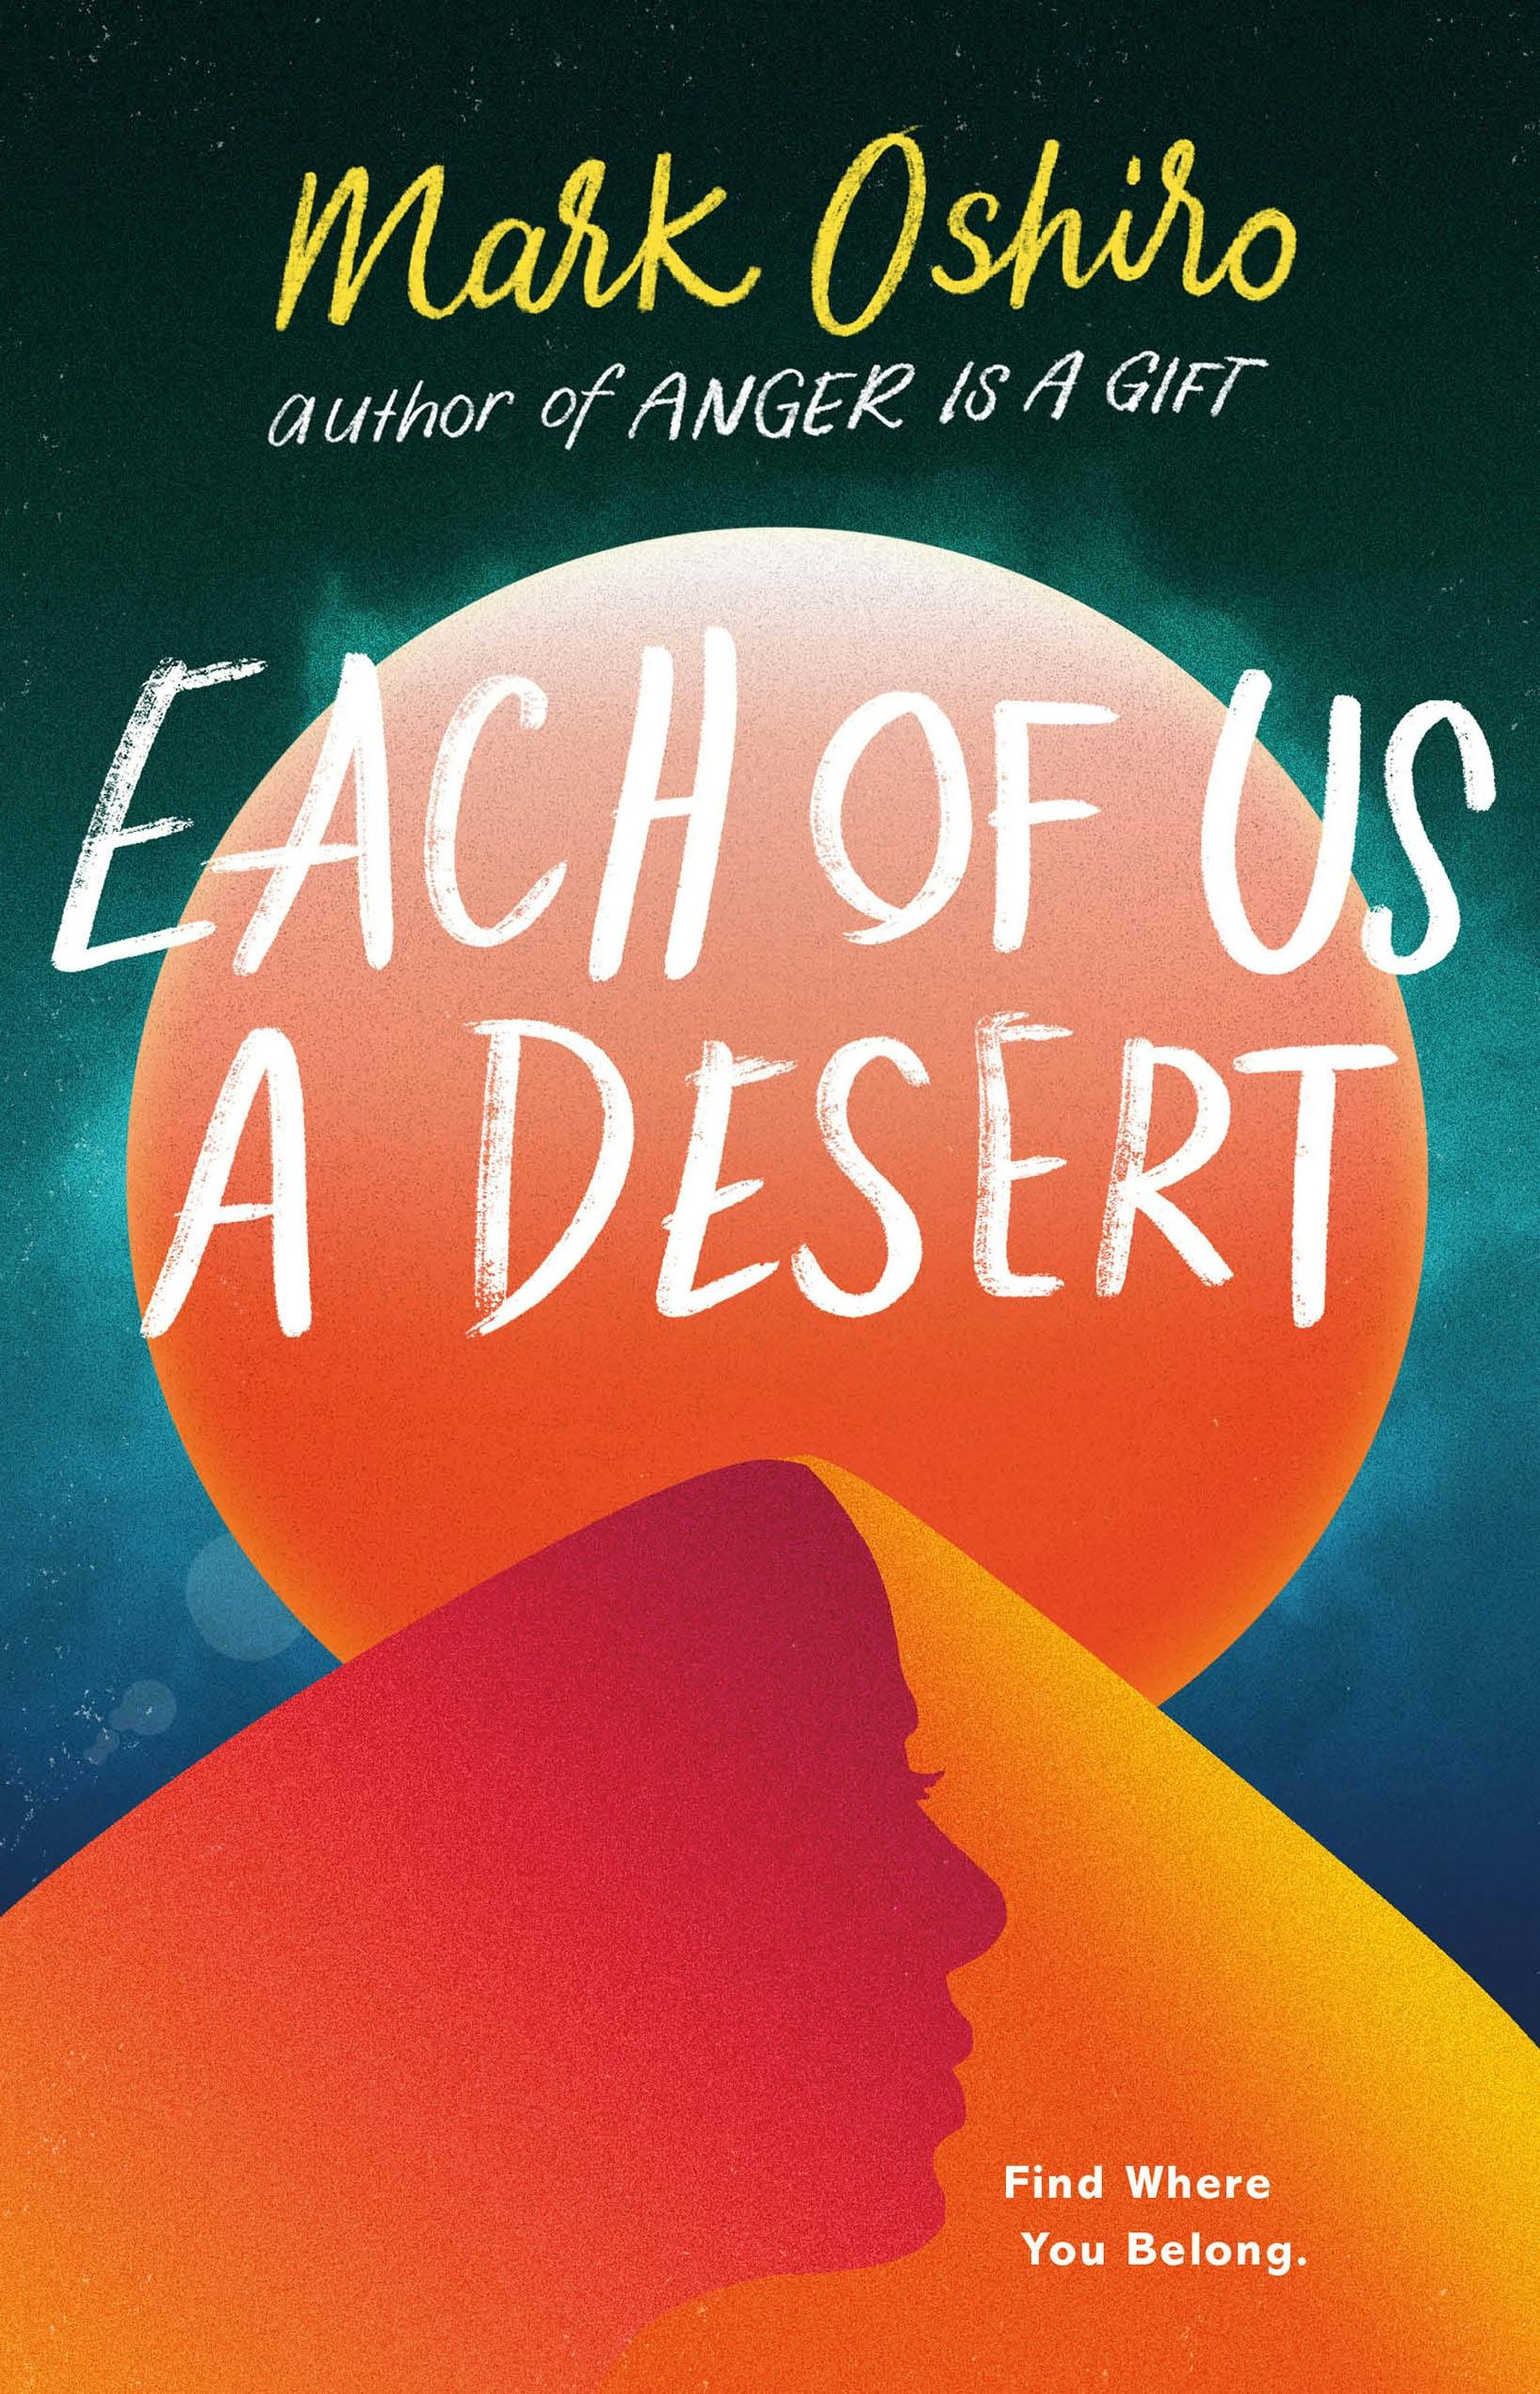 Cover for the book titled as: Each of Us a Desert